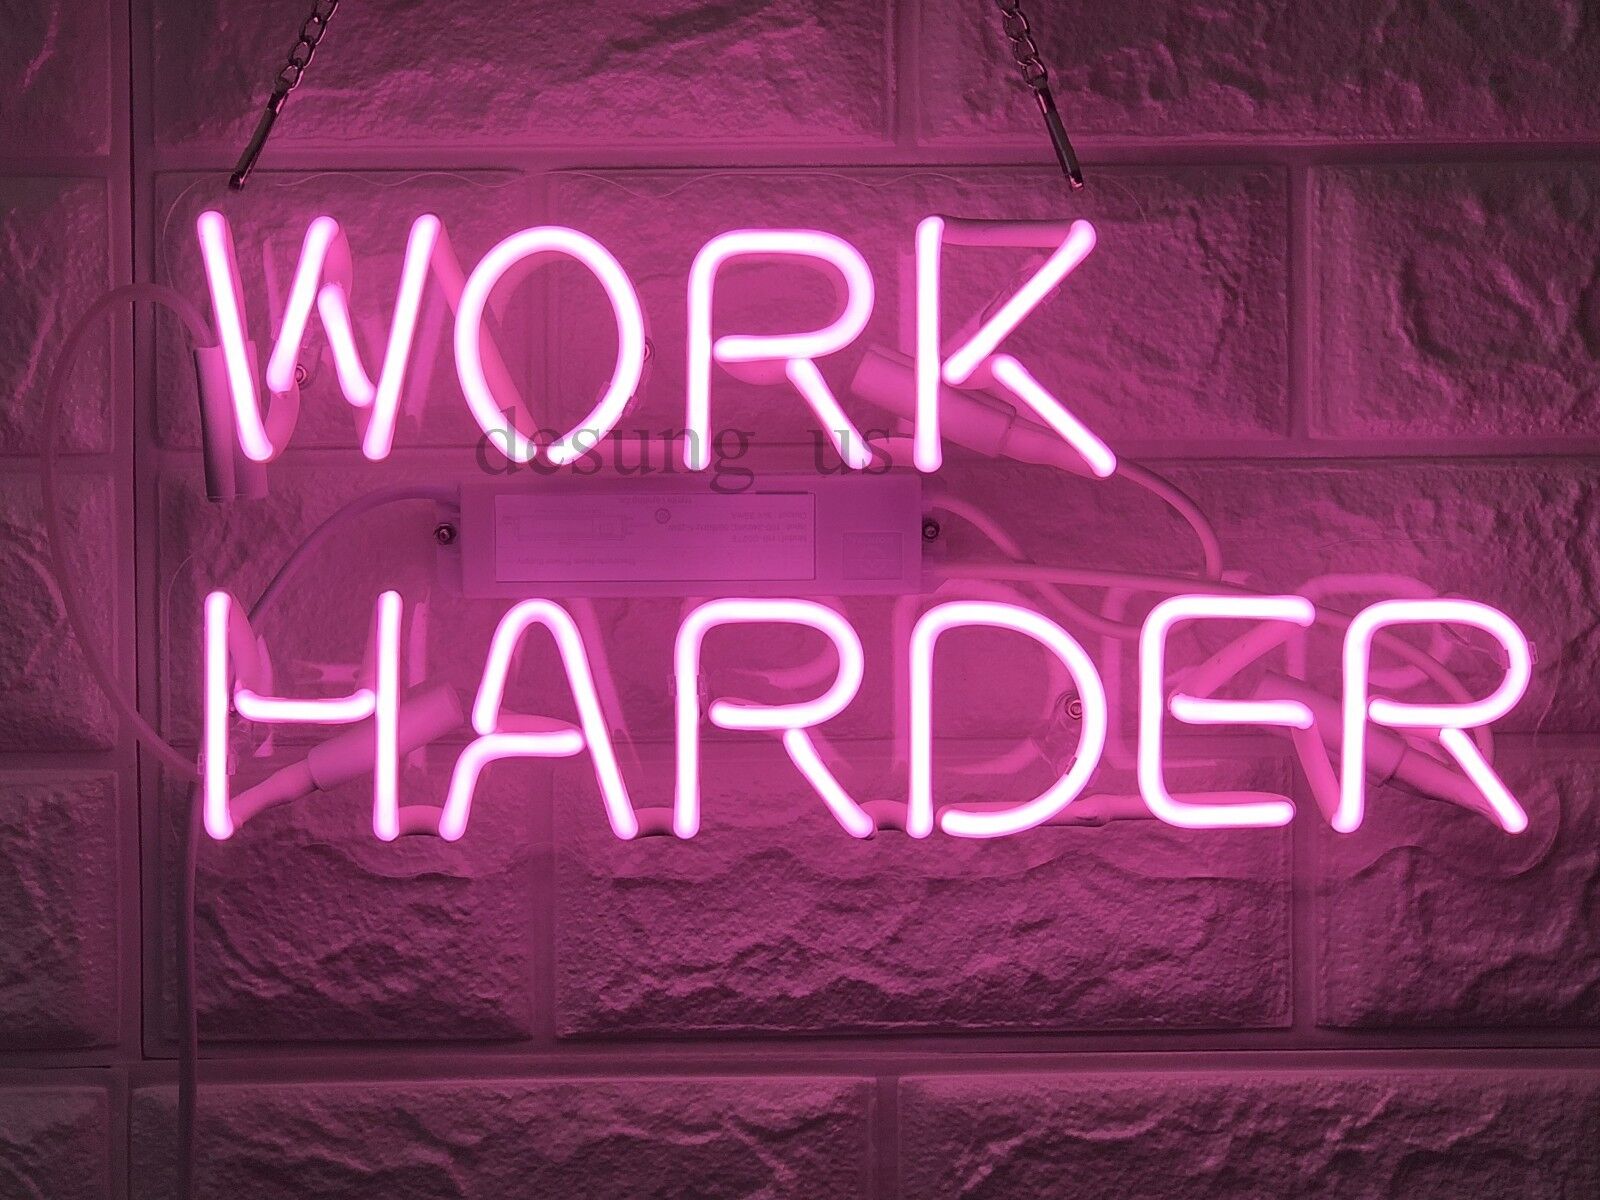 New Work Harder Neon Sign Wall Decor